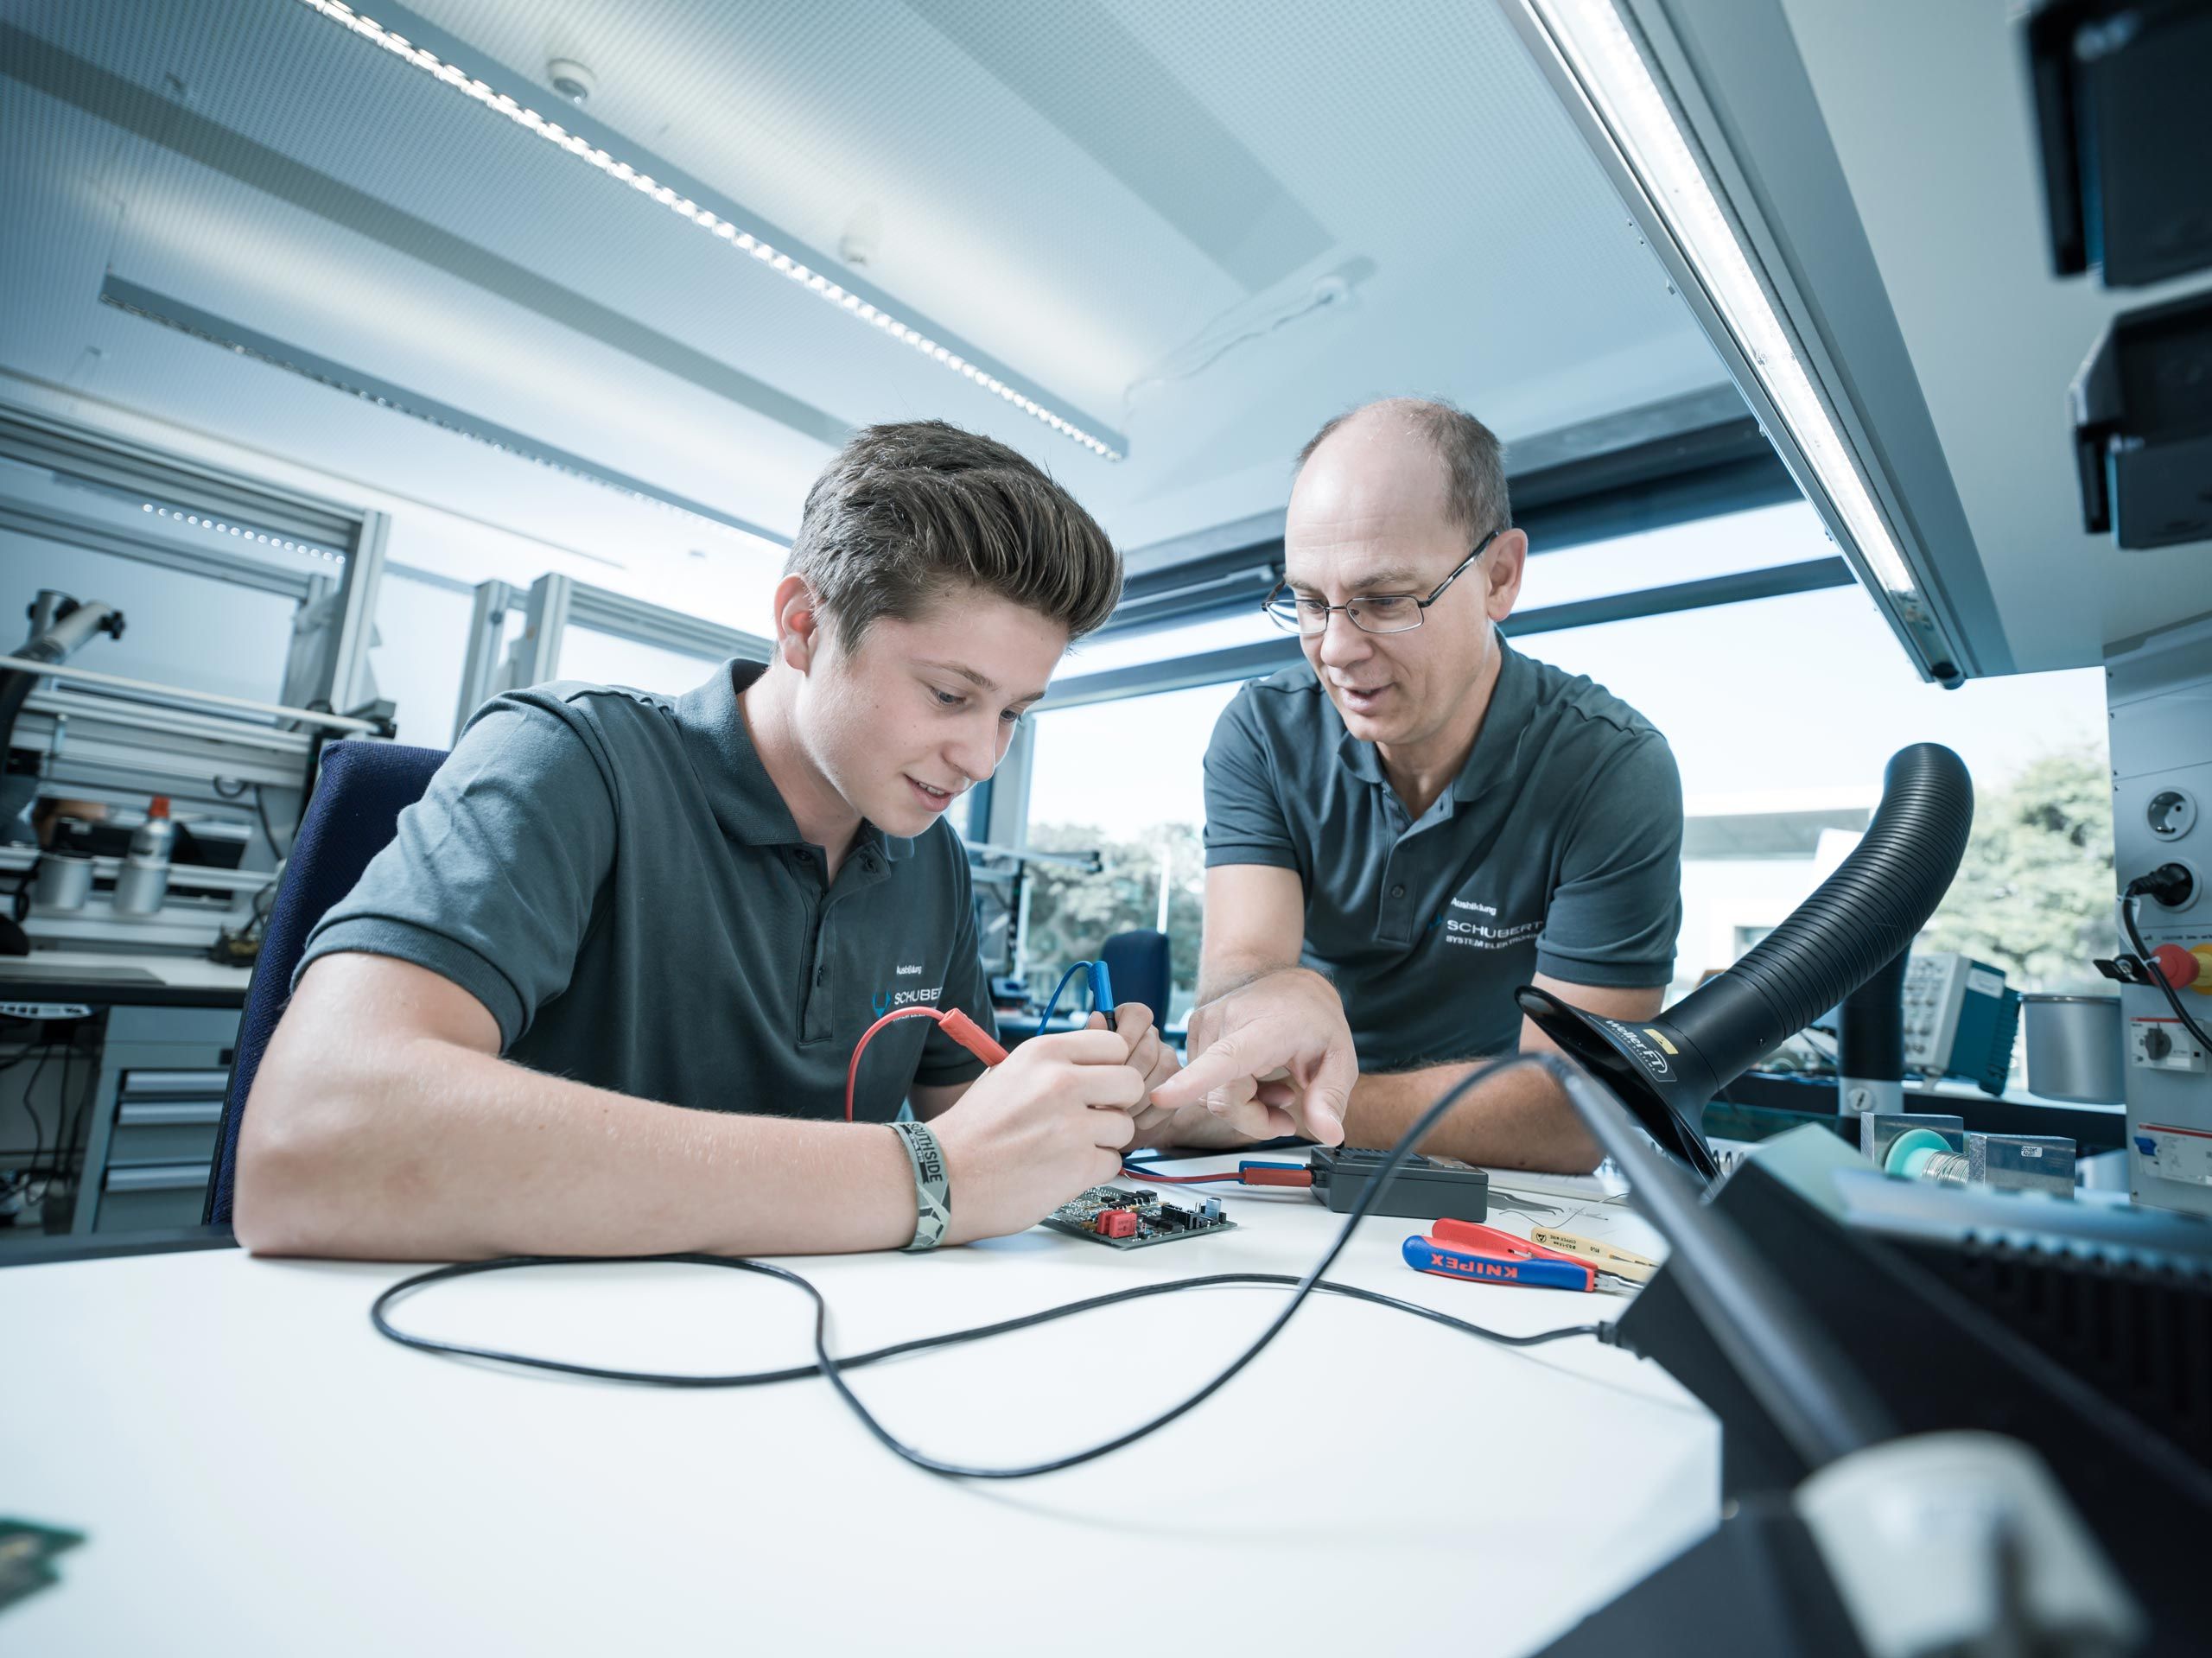 The training manager supports a trainee with soldering 